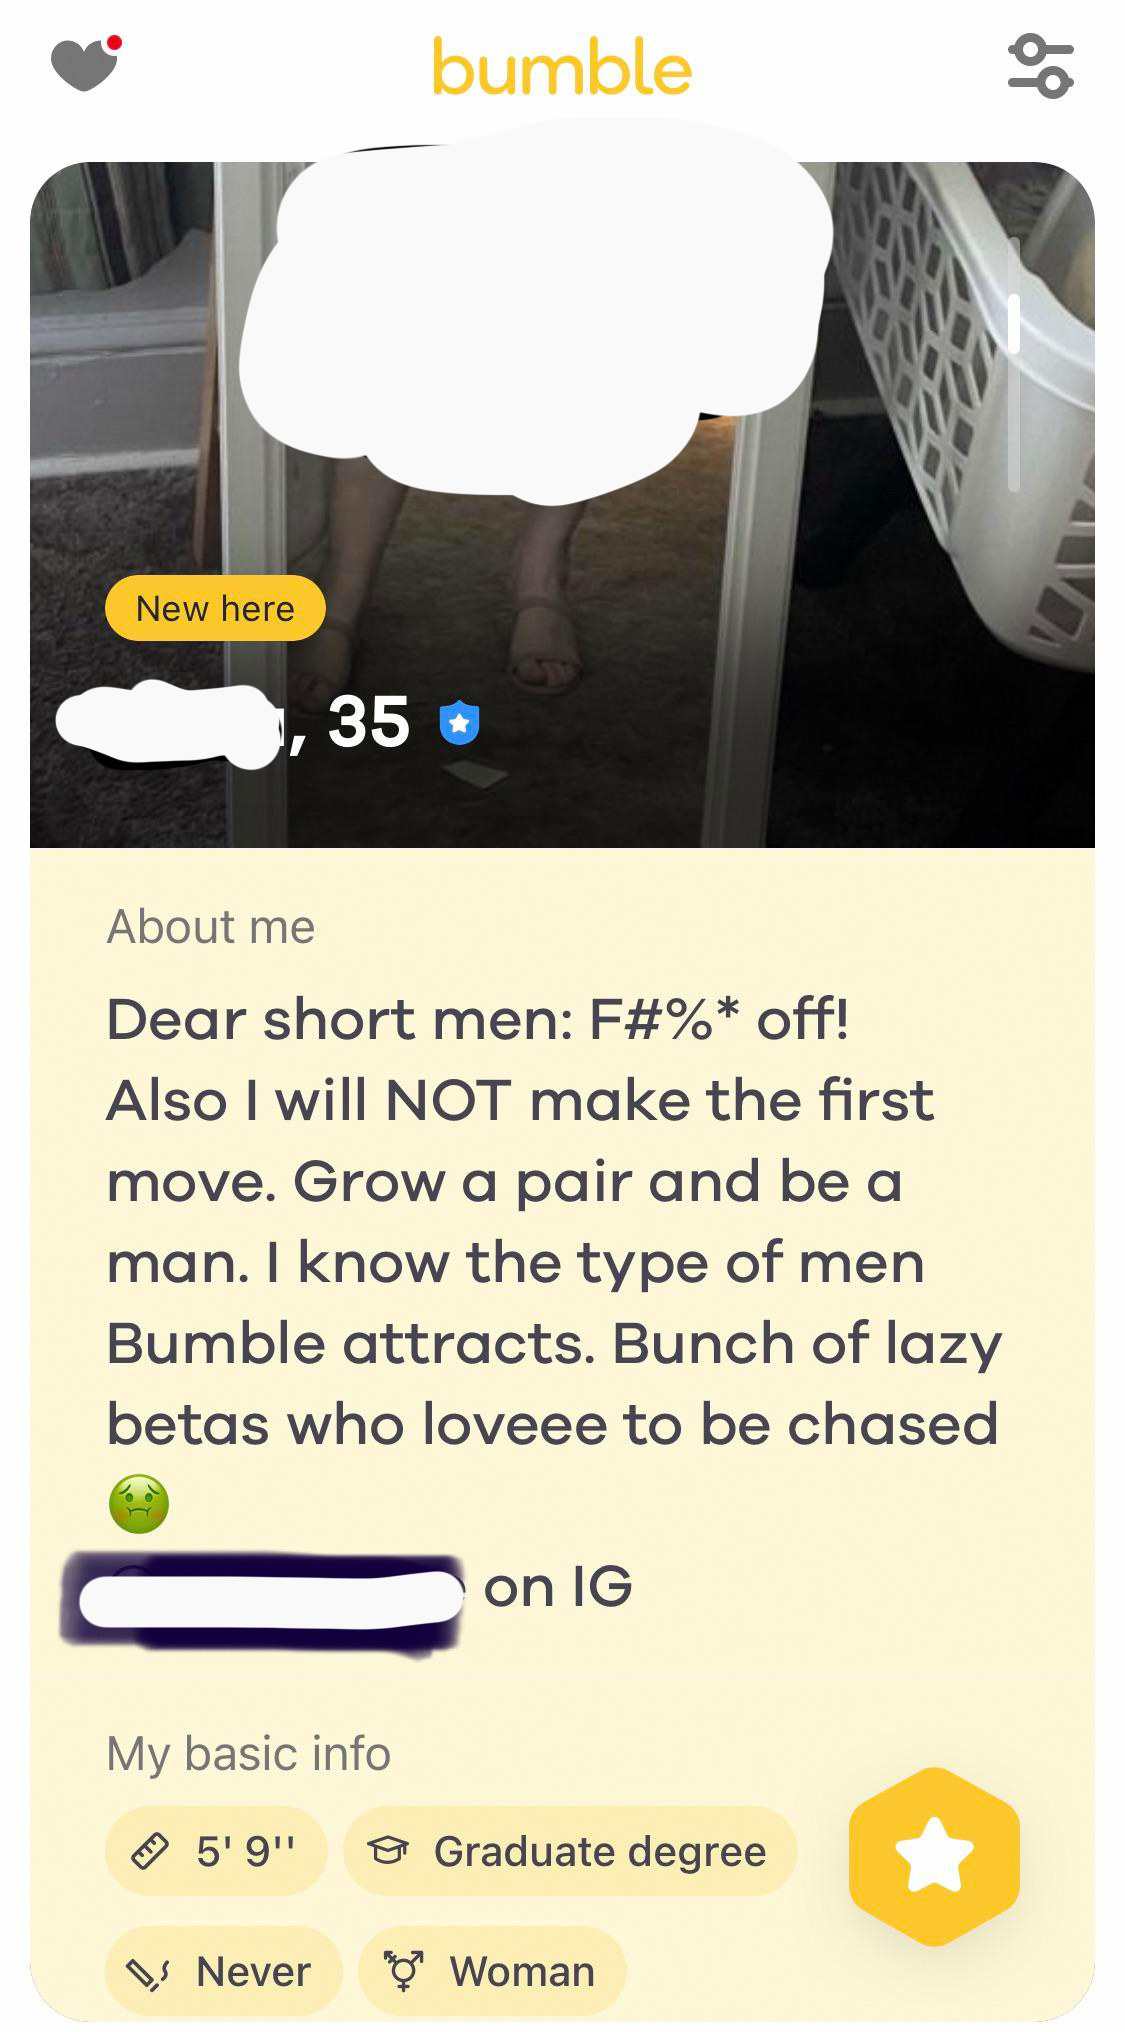 a woman whose profile says for short men to fuck off and that she will not be making the first move, when bumble&#x27;s whole point is that women make the first move